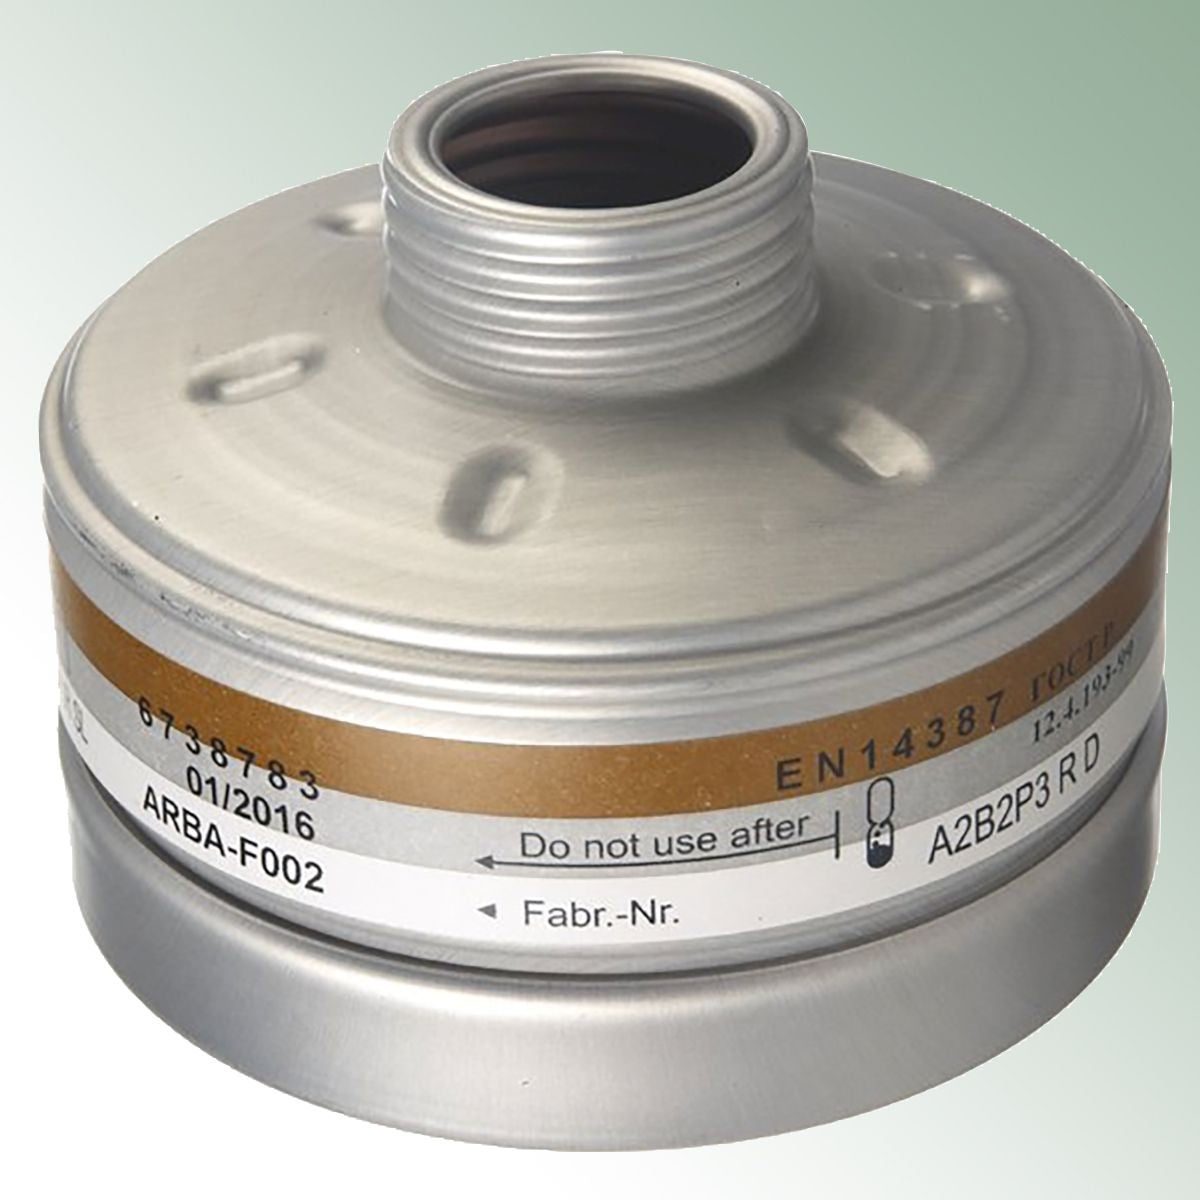 Combination filter 1140 A2B2 P3 R D with round thread EN 148-1